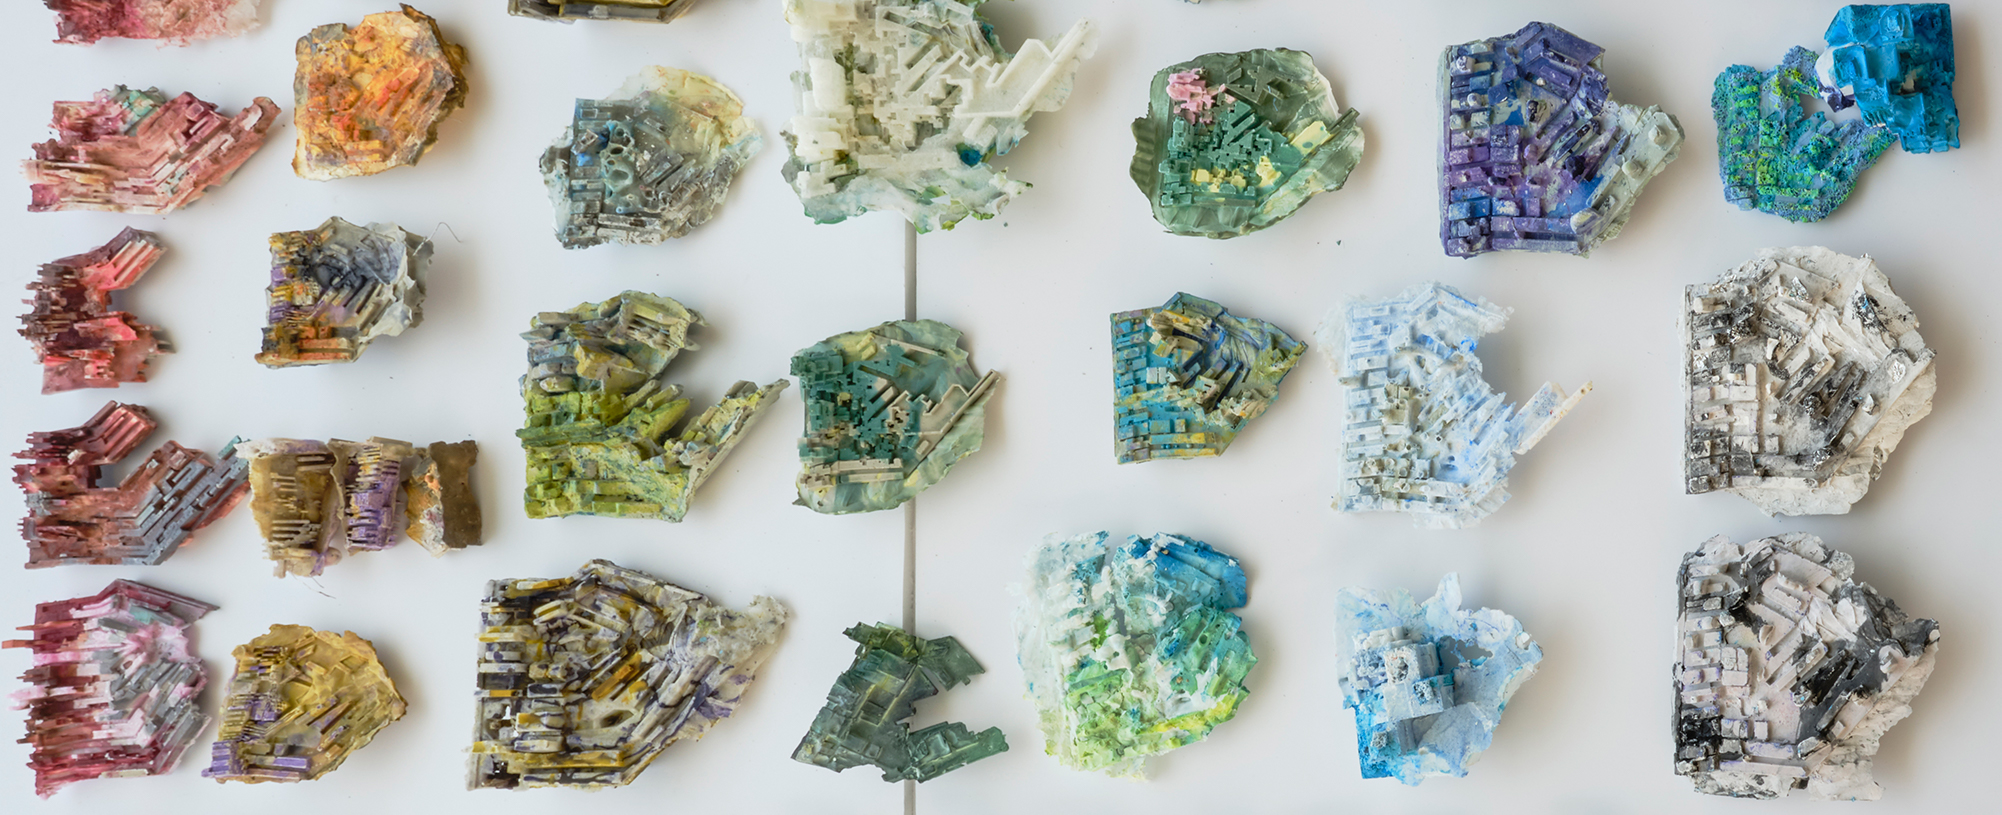 Image of a collection of multicolored topographic models created using plaster.